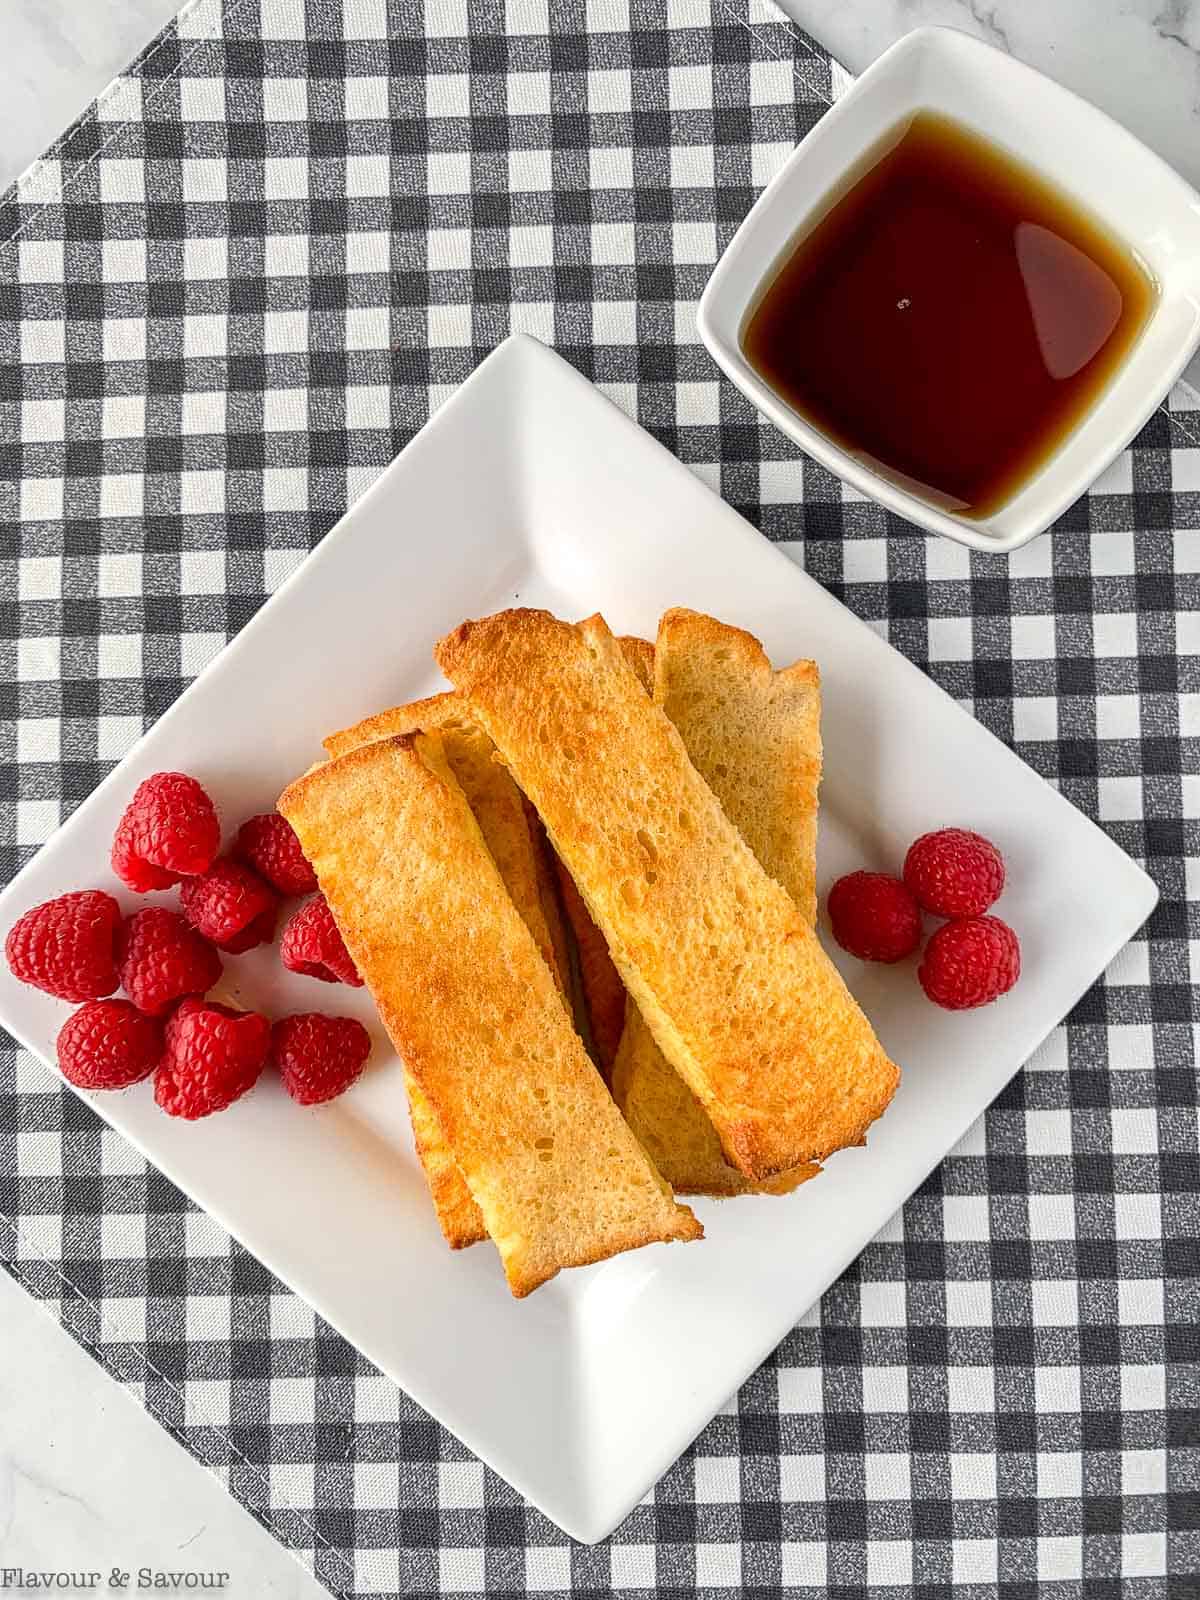 Cinnamon French Toast sticks with raspberries and a bowl of maple syrup